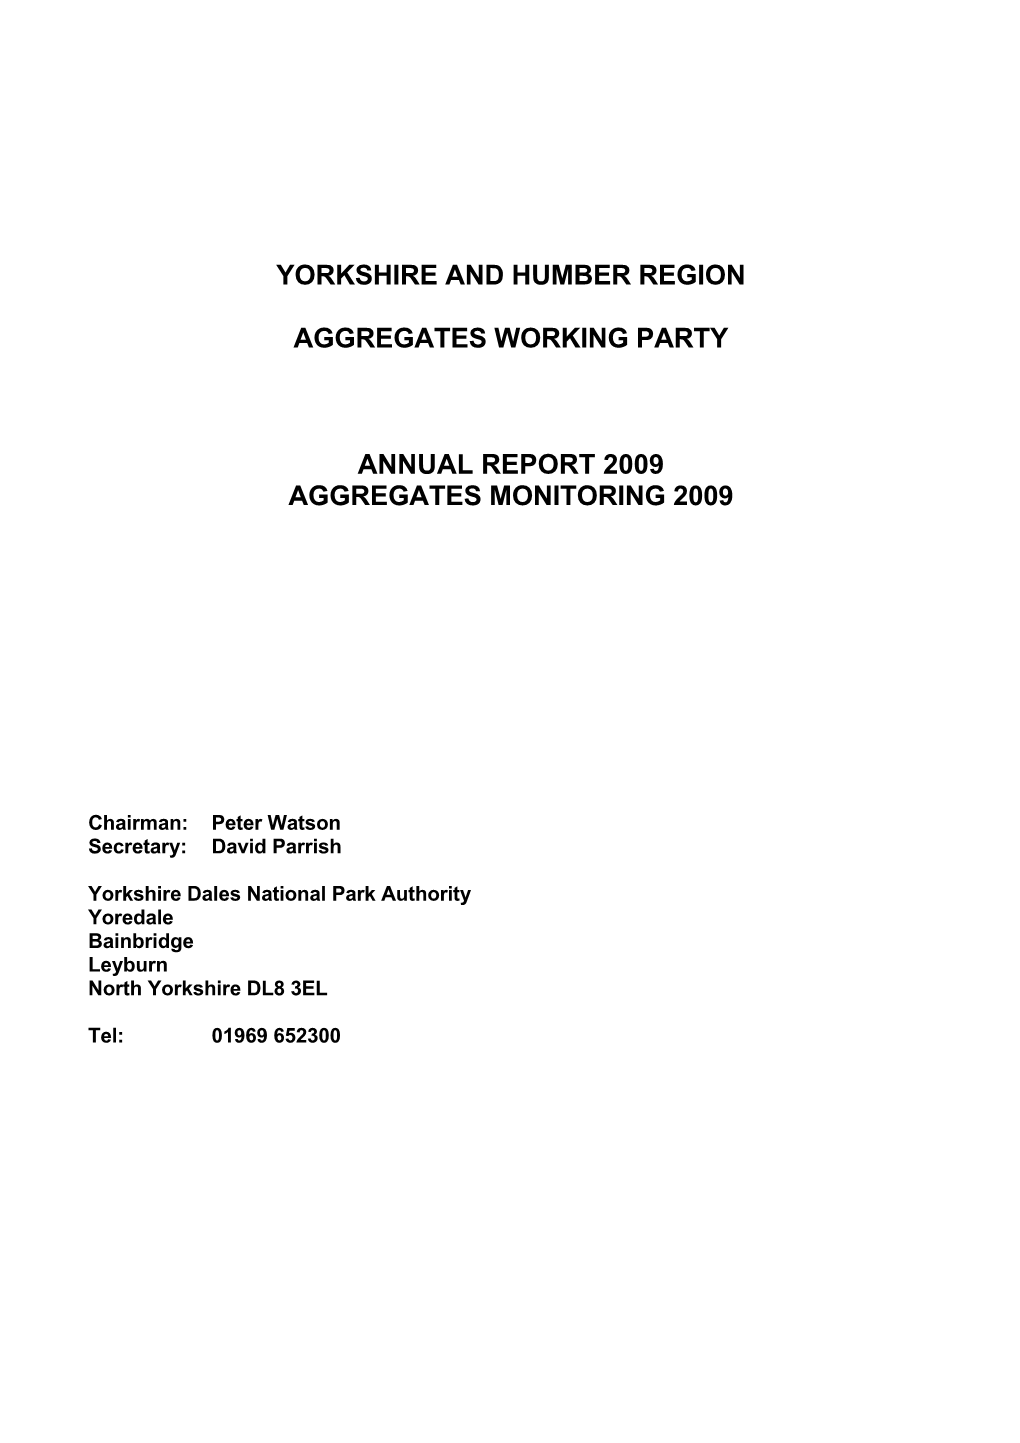 Yorkshire and Humber Region Aggregates